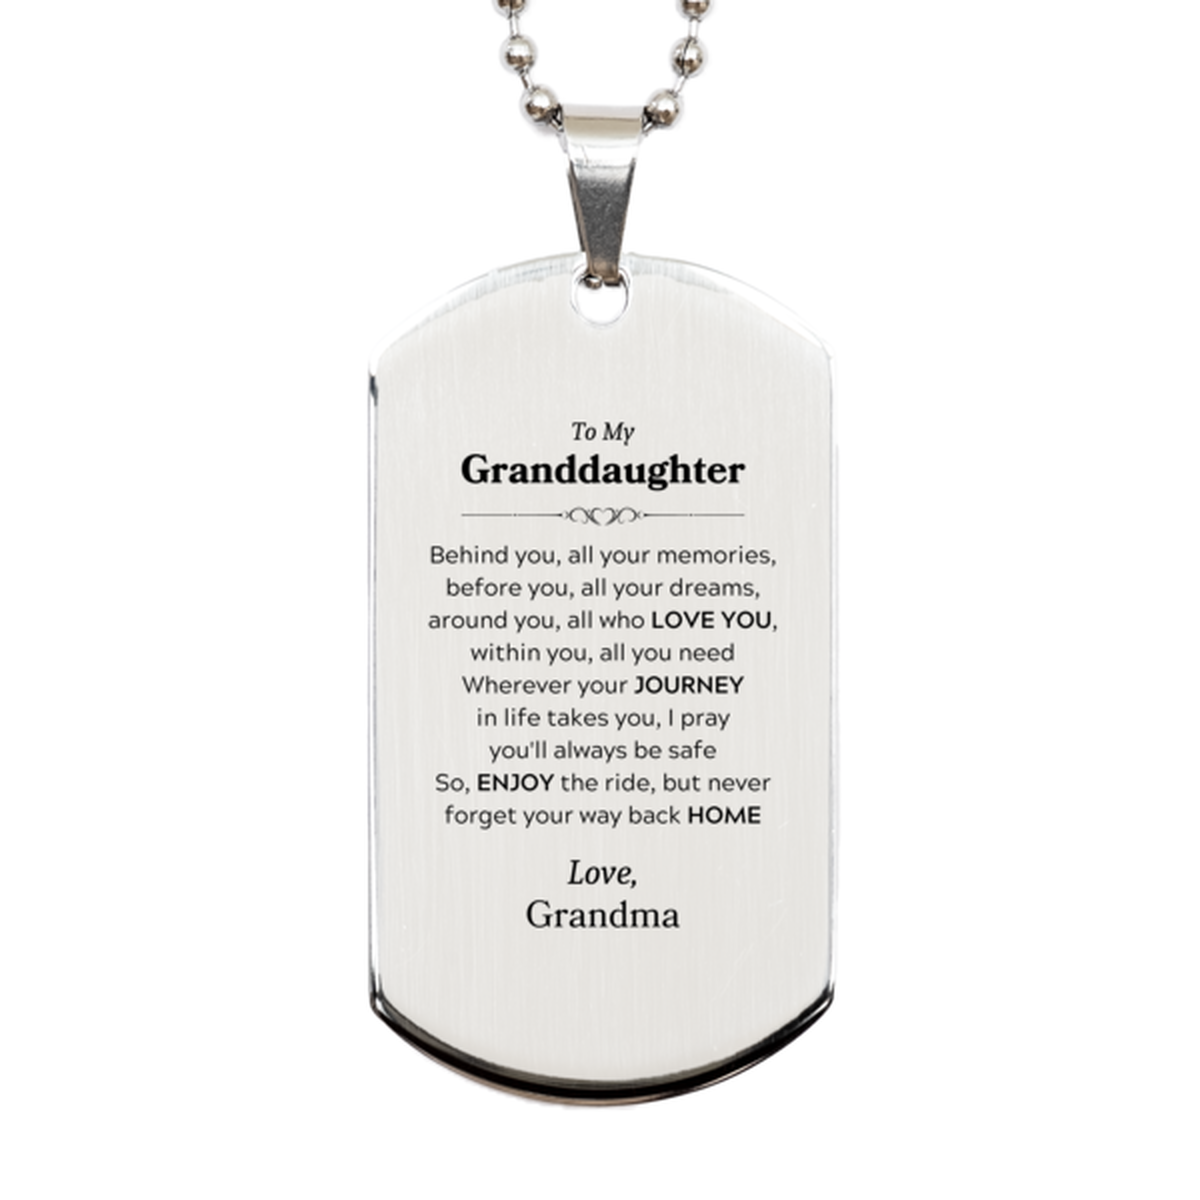 To My Granddaughter Graduation Gifts from Grandma, Granddaughter Silver Dog Tag Christmas Birthday Gifts for Granddaughter Behind you, all your memories, before you, all your dreams. Love, Grandma